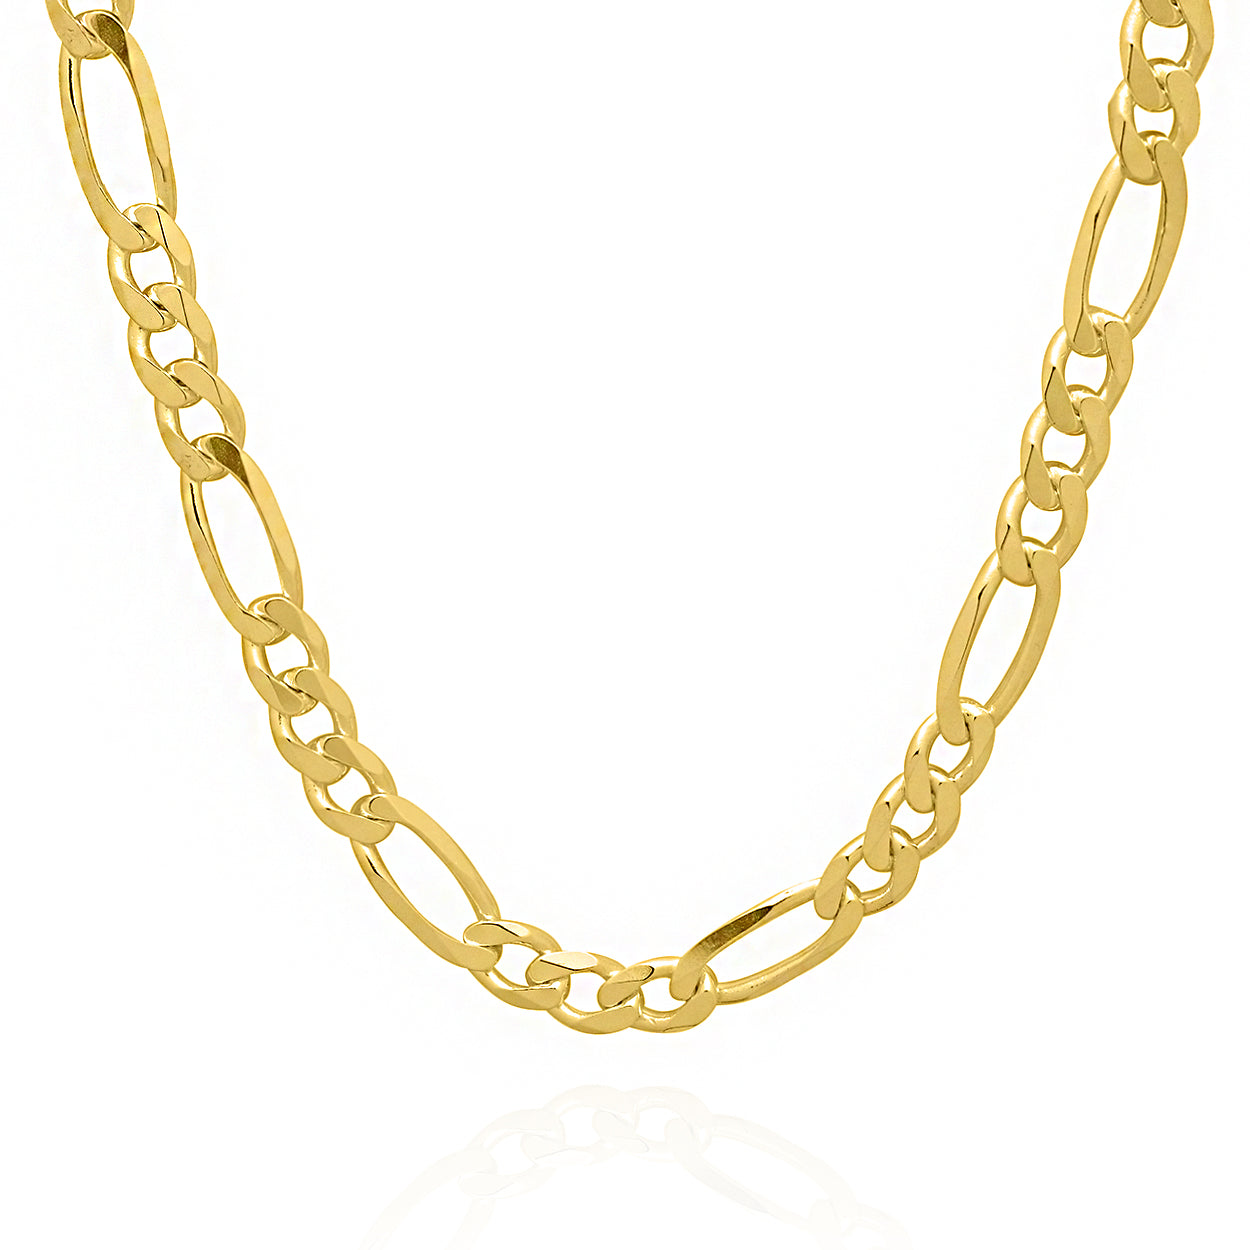 7mm Wide Figaro Style Chain Solid Gold Yellow